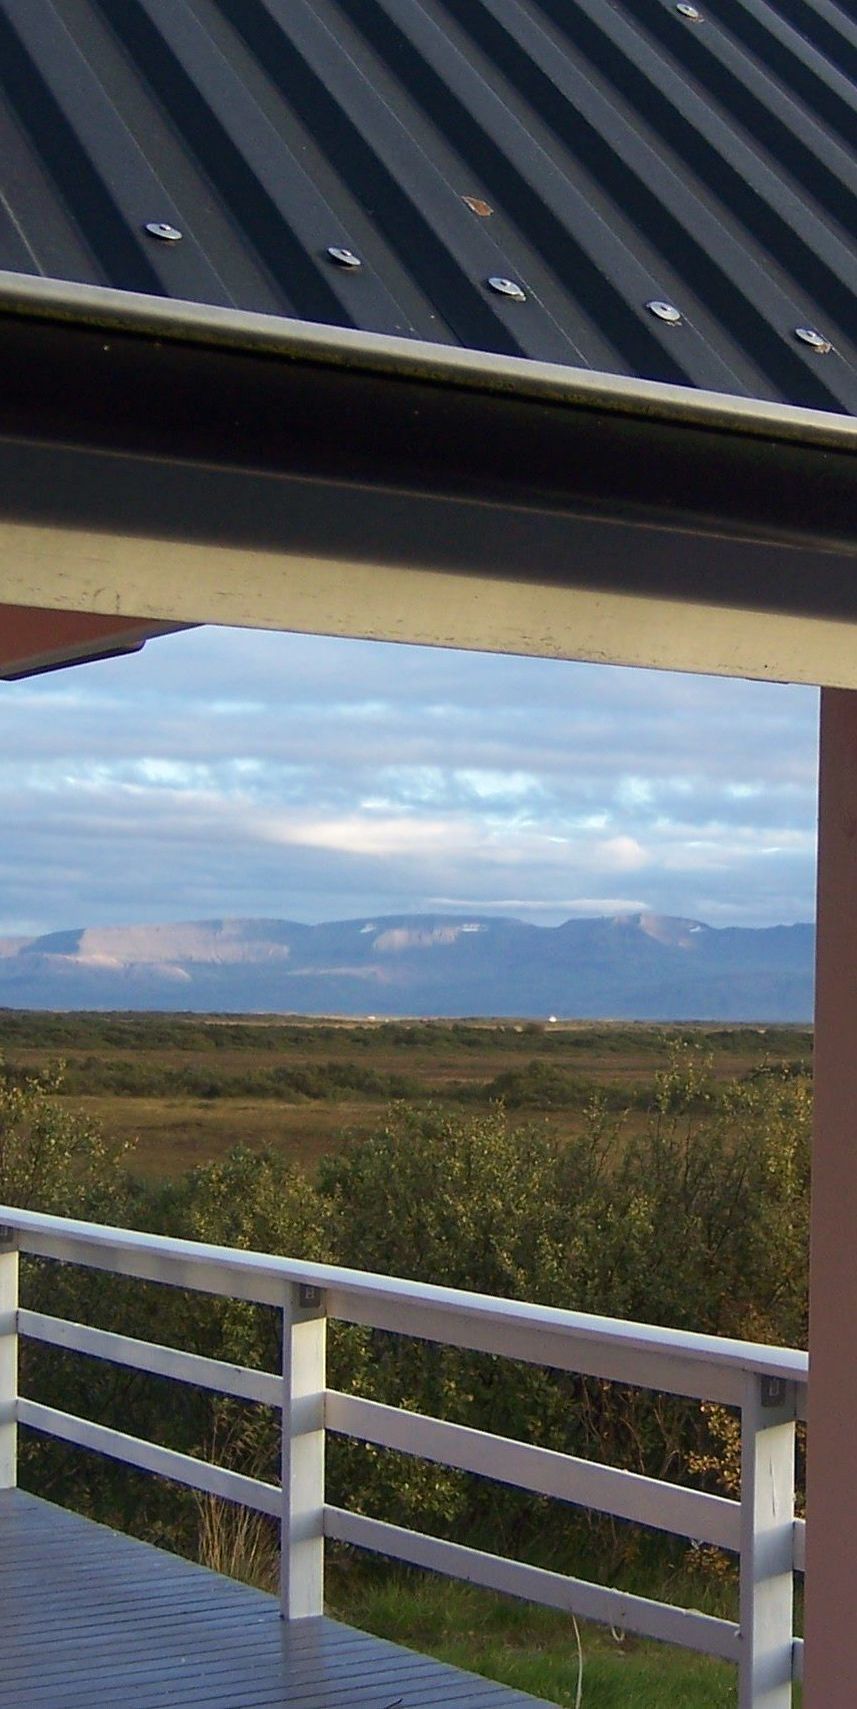 View from the terrace of the holiday home into the vastness of the Icelandic landscape